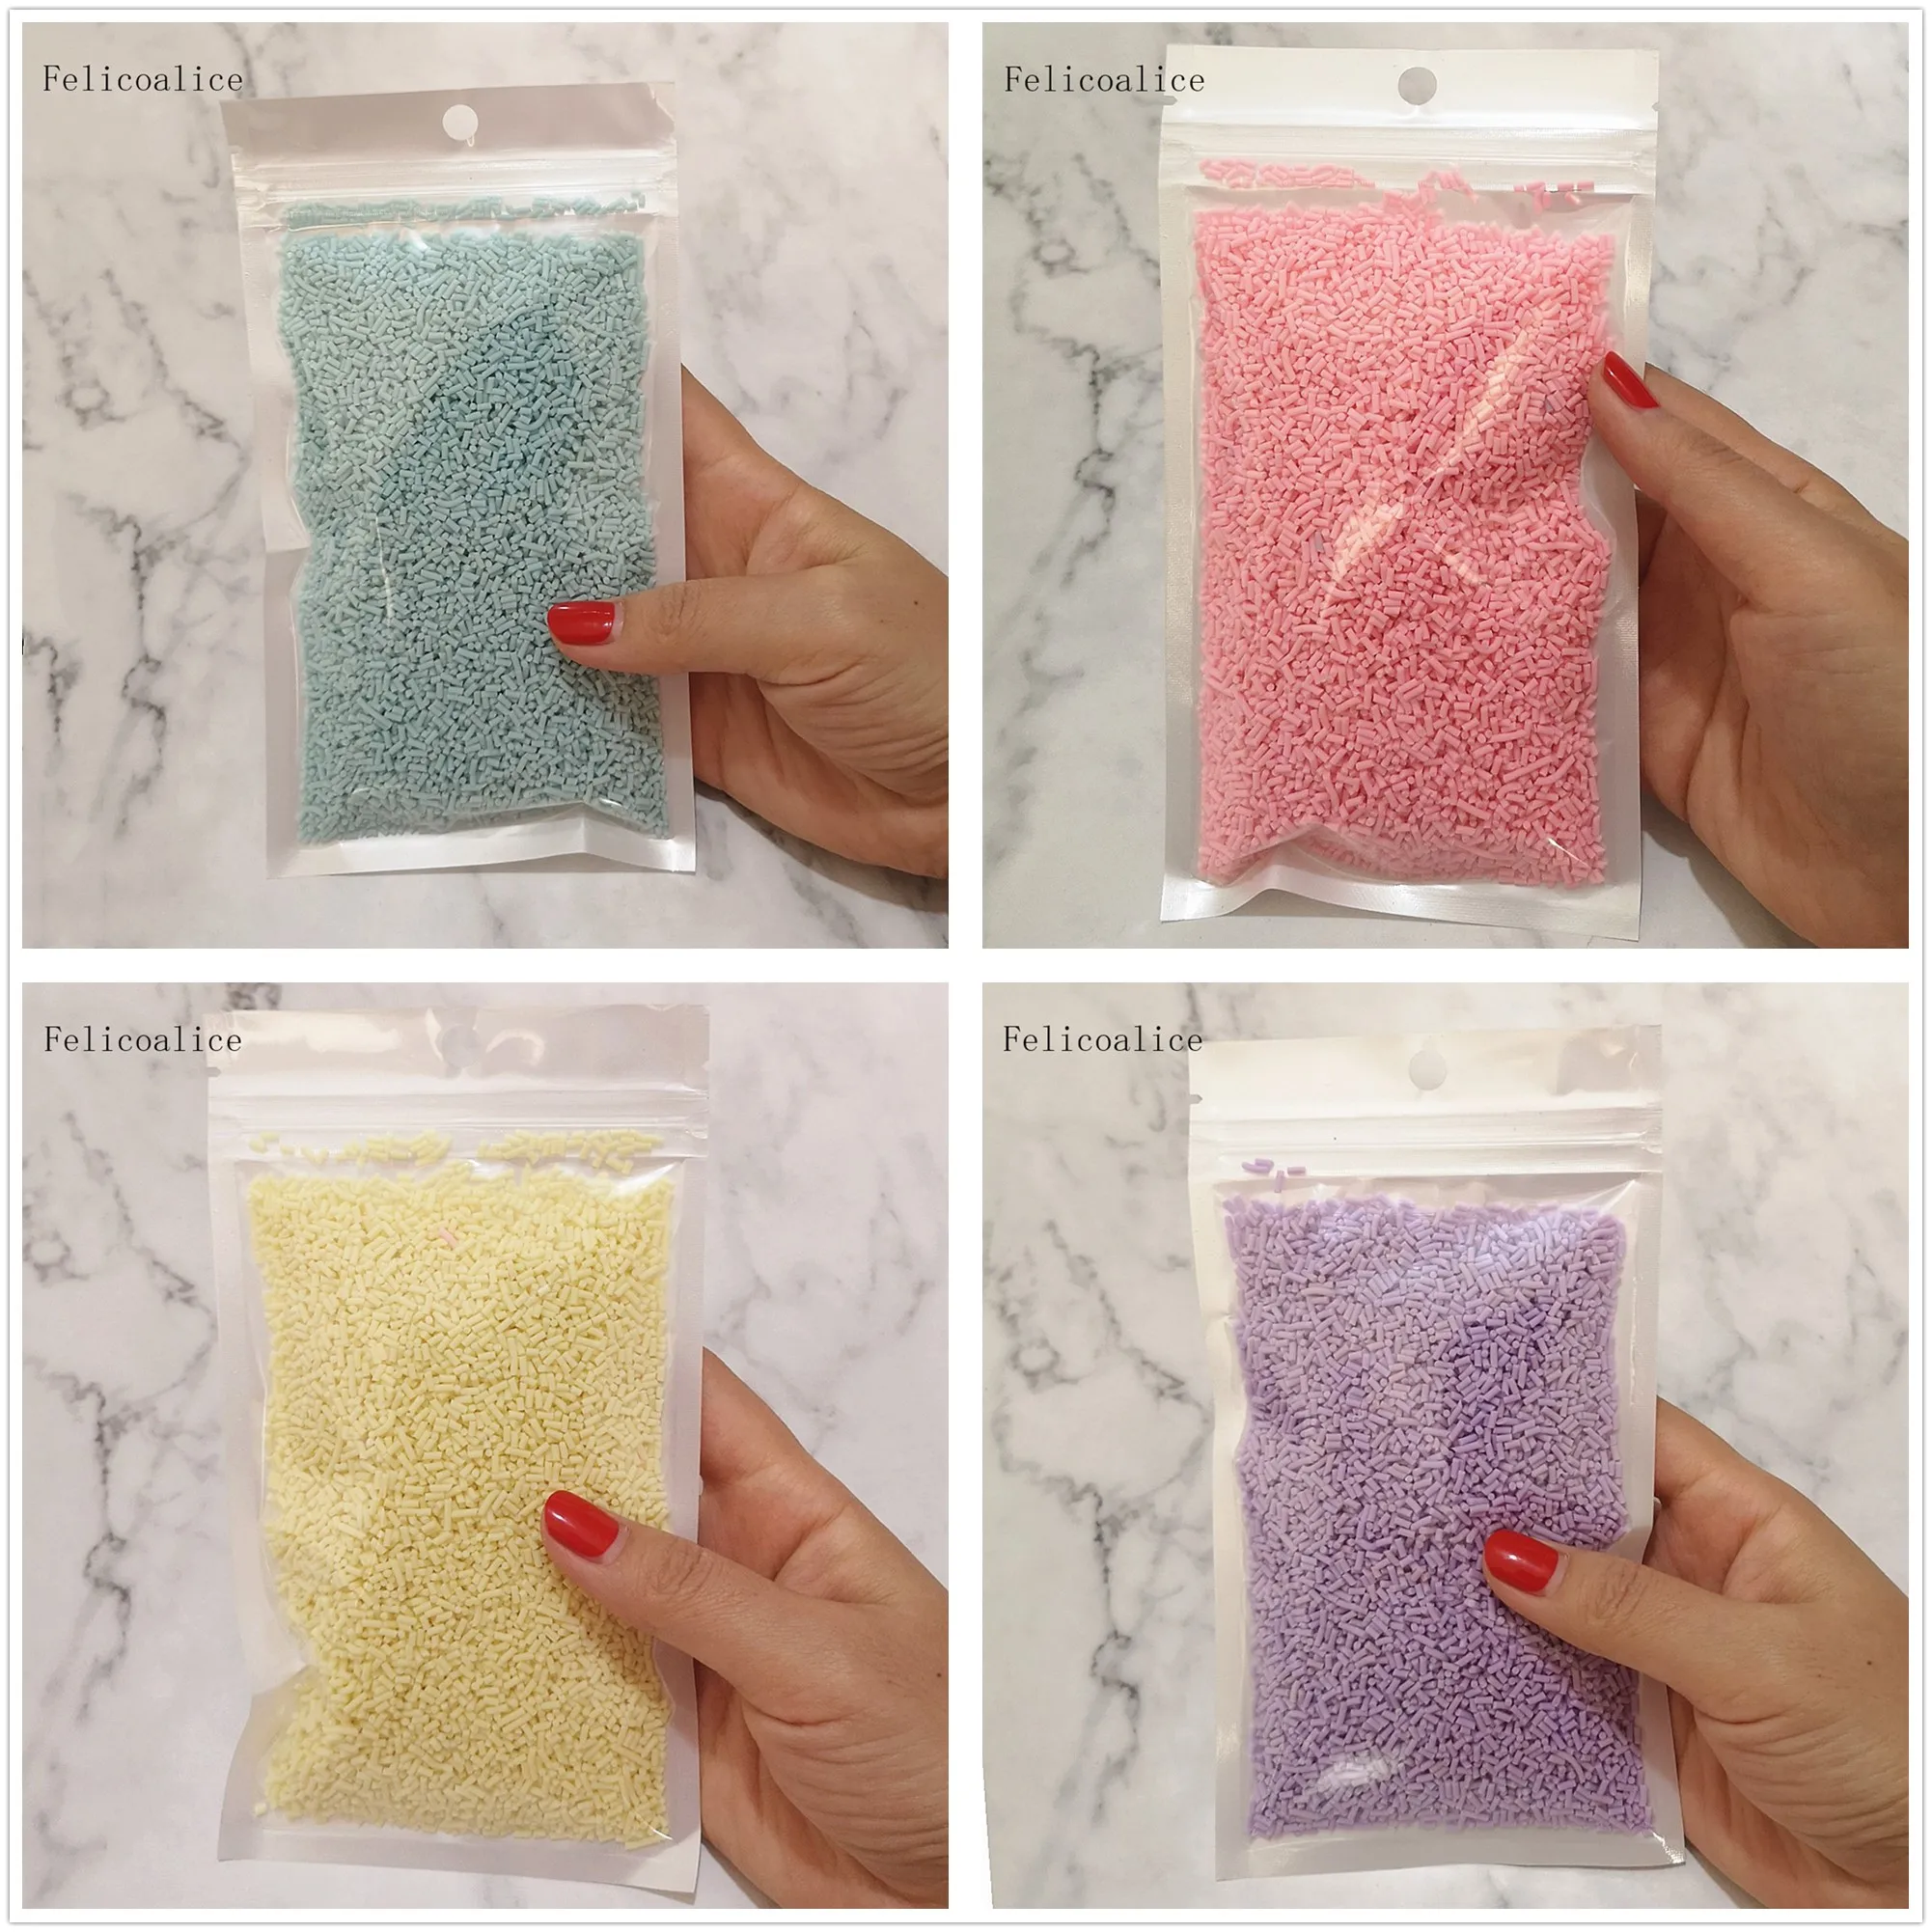 

100g/lot Fake Candy Sweets Sugar Clays Sprinkles for Crafts Making Filler Phone Decoration DIY toys (about 3-5mm)